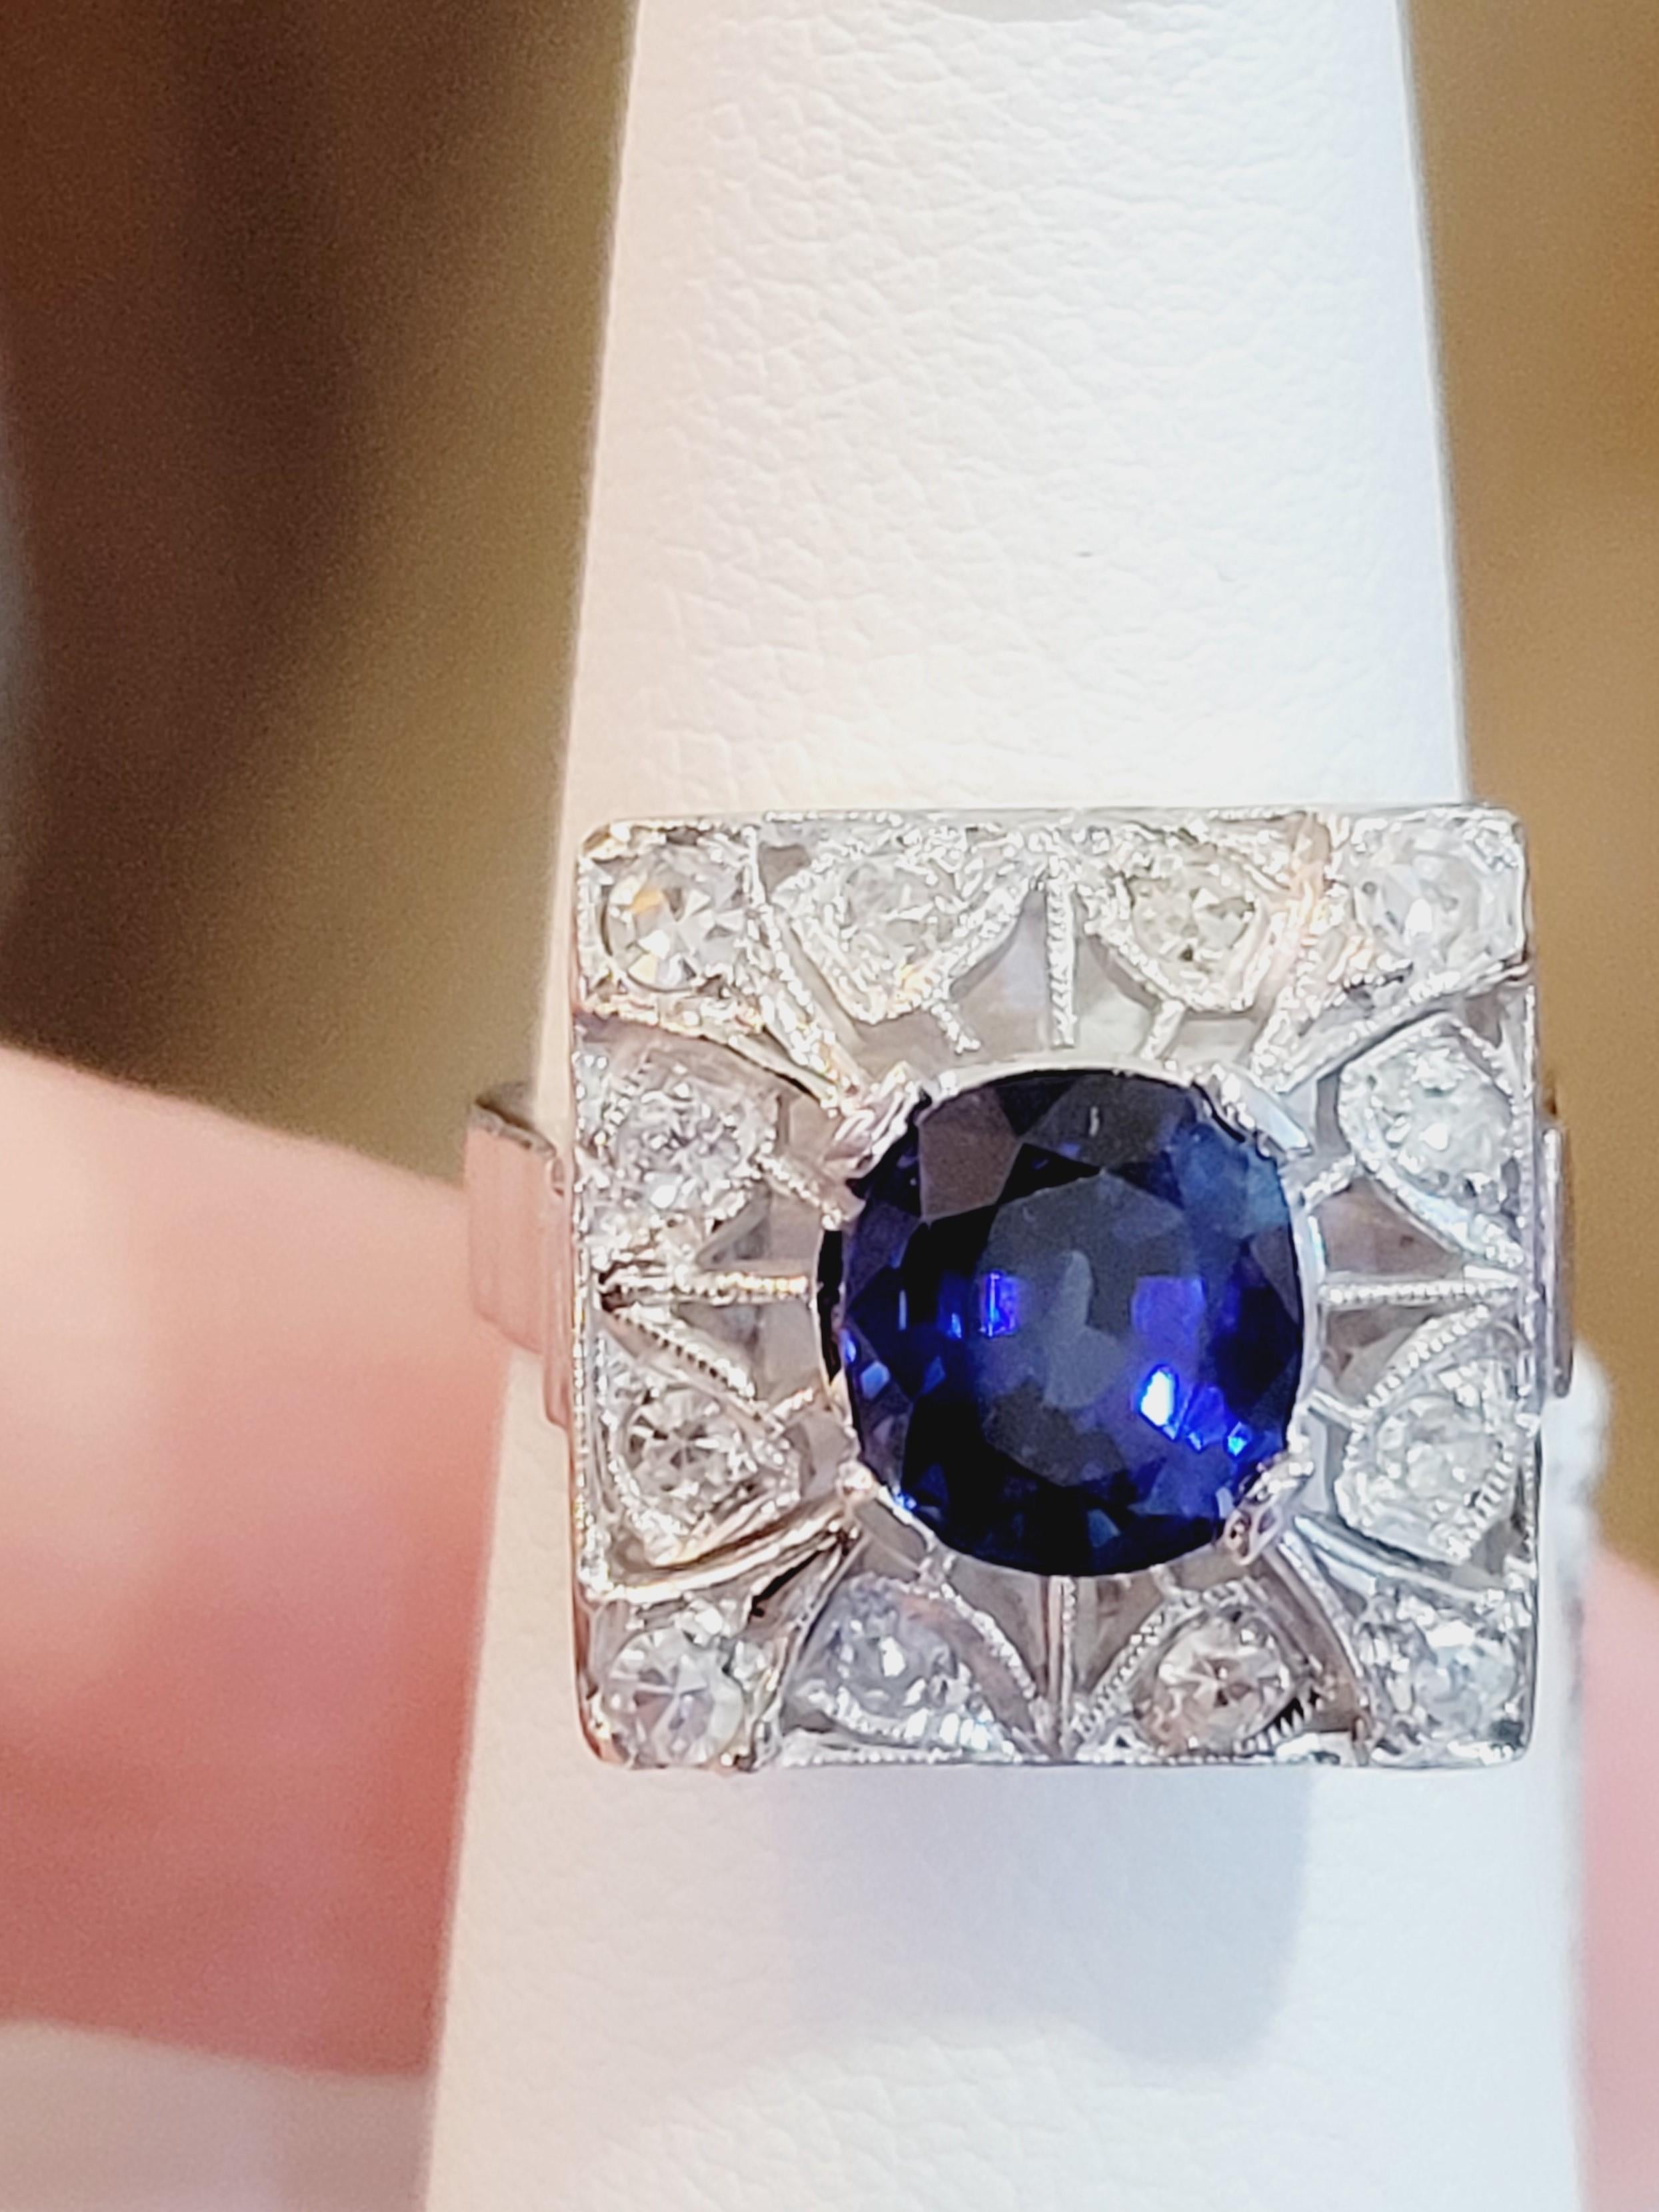 Art Deco Style Sapphire and Diamond Ring. Natural Ceylon Vivid Blue Sapphire 1.80carats. Cushion. Measurements: 7.44 x 6.70.
Diamond Weight: 0.50 carats. Old Mine cut. Metal: Platinum. 8.60 grams total weight. Size 5.5 Retail Price $16000